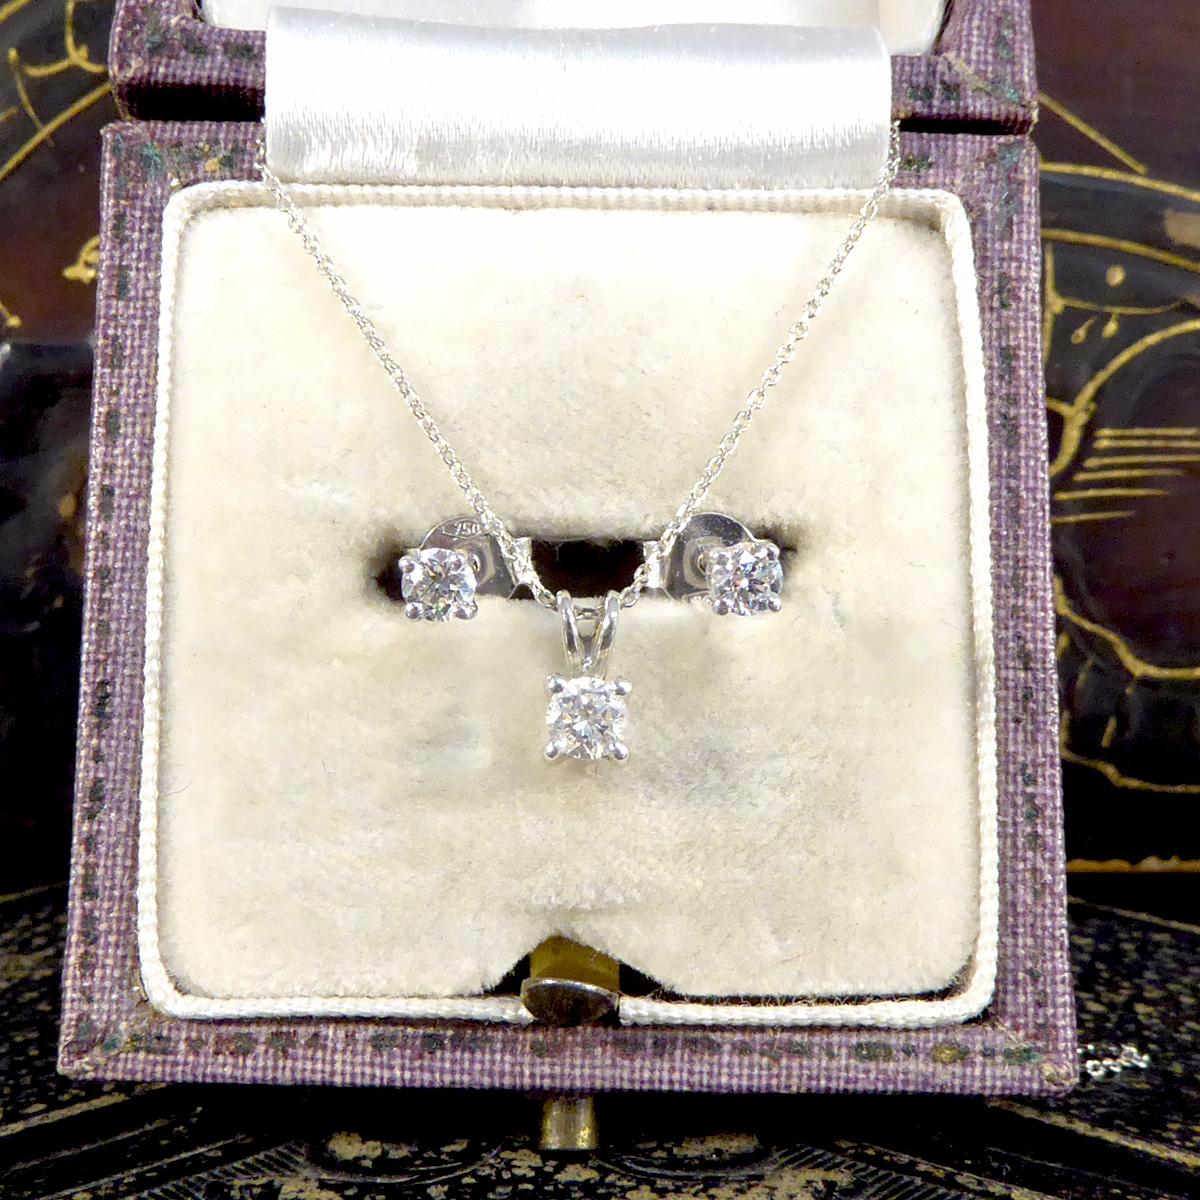 A classic pair of Diamond stud earrings and pendant necklace set, the perfect gift for any loved one. Featuring are a pair of Diamond stud earrings totalling 0.25ct set in an 18ct White Gold four claw box setting. Alongside these stud earrings are